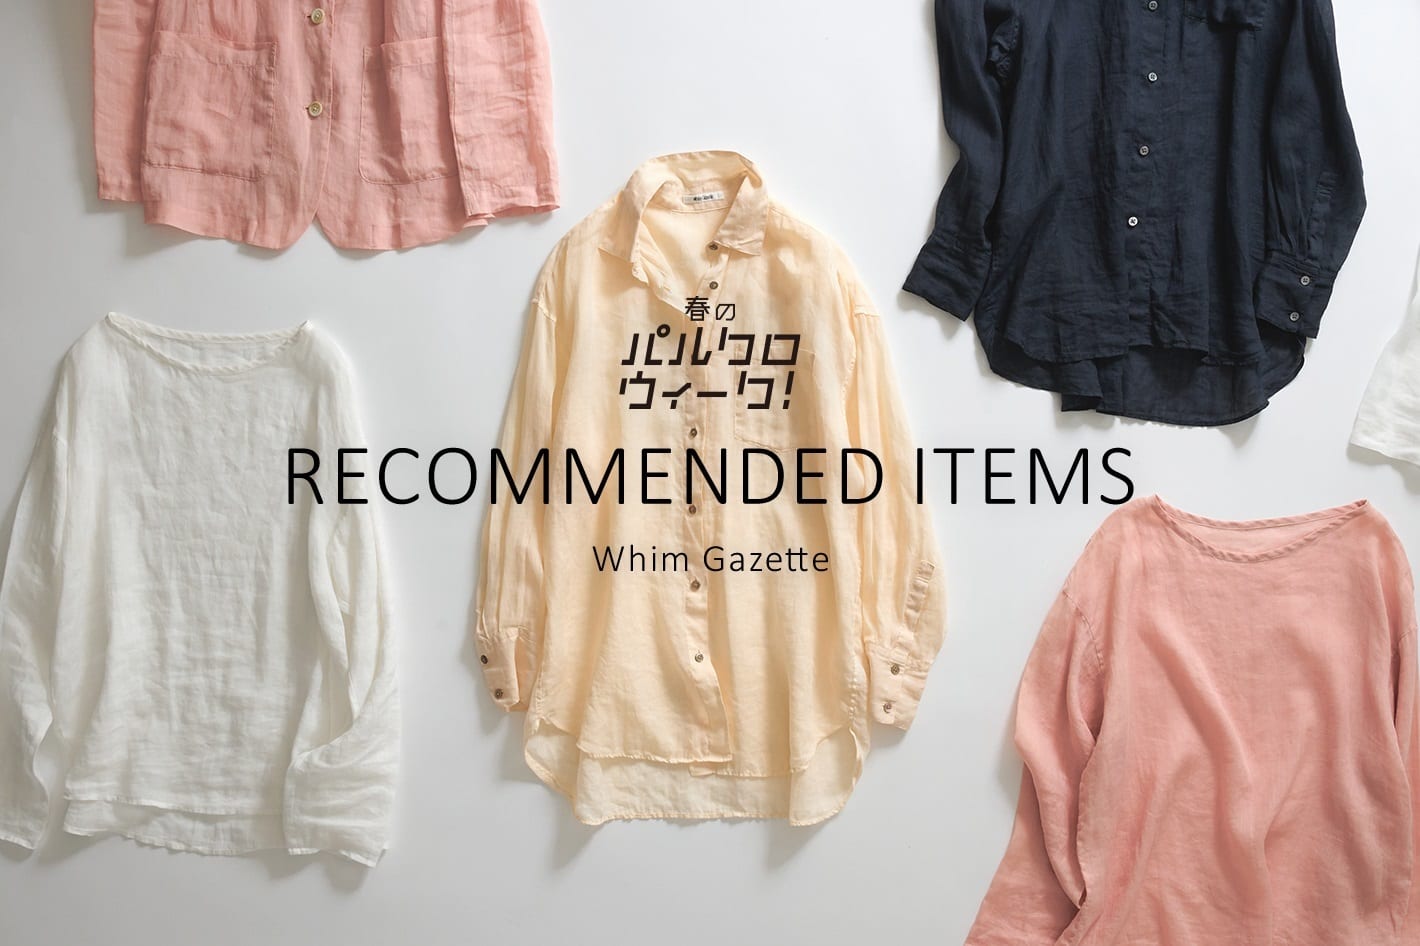 Whim Gazette 『パルクロウィーク』 RECOMMENDED ITEMS 第2弾！！